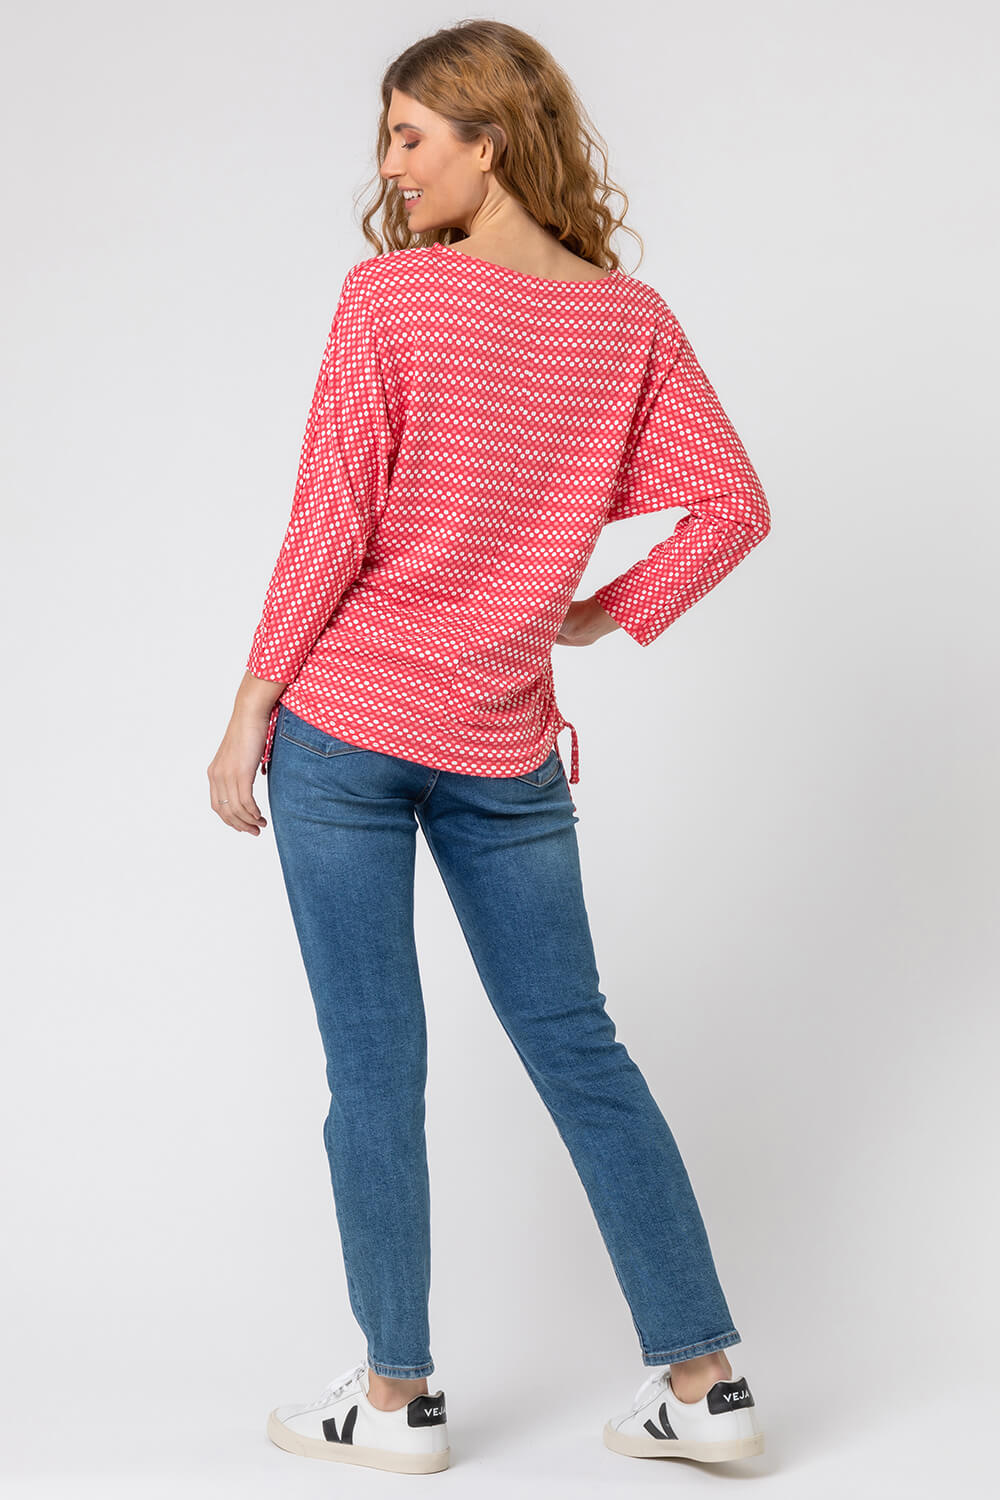 Red Textured Spot Print Stretch Top, Image 2 of 4